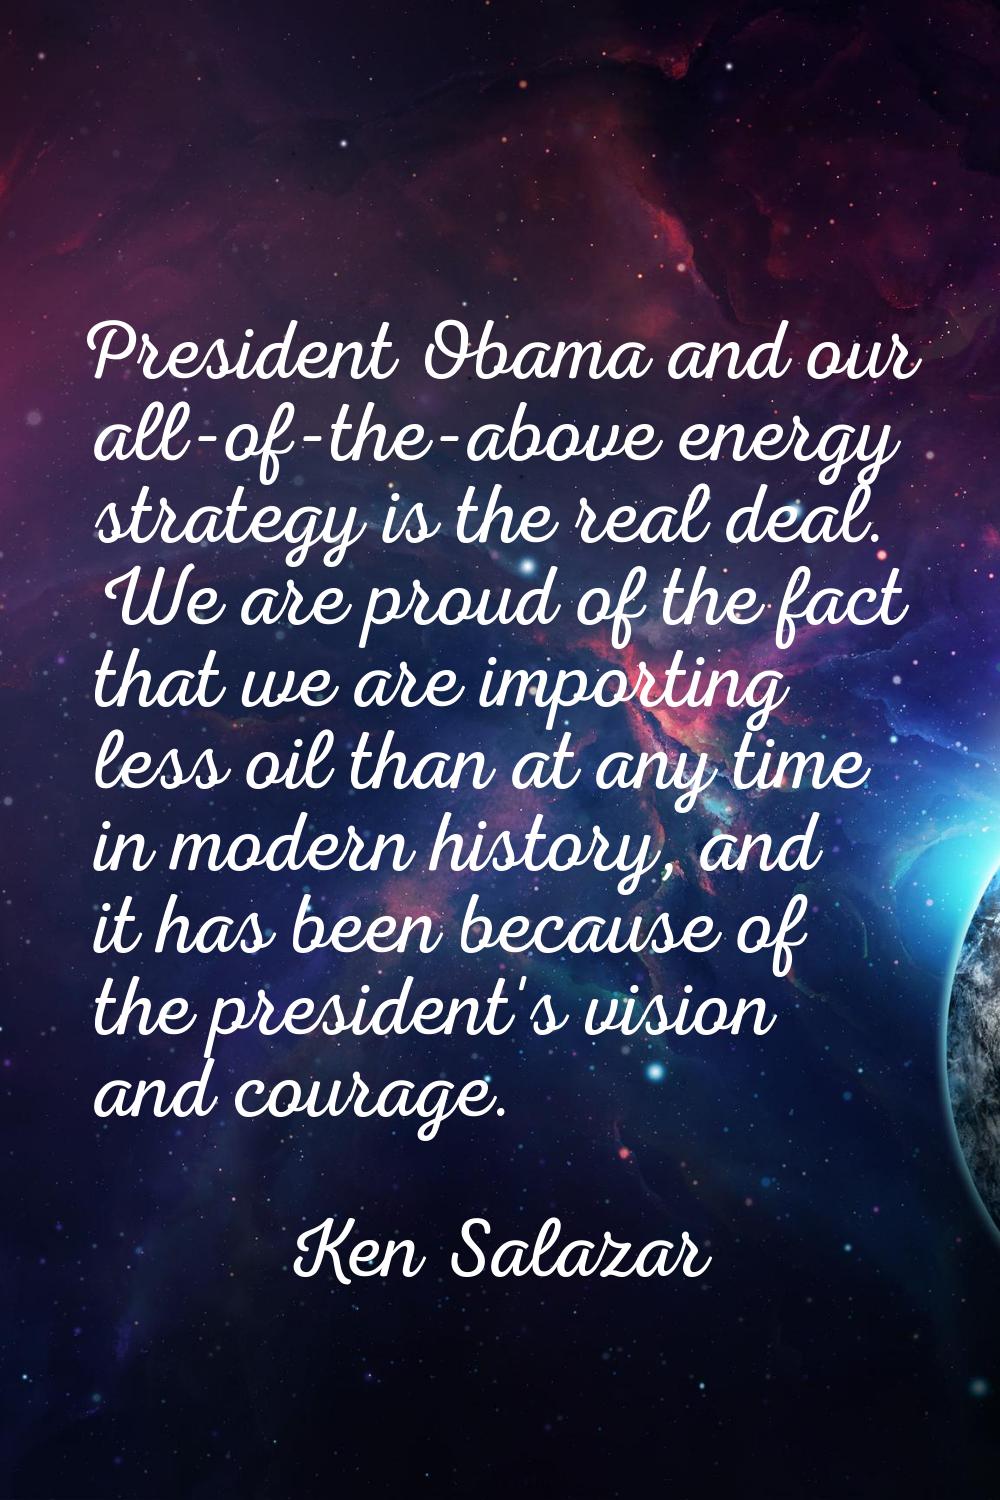 President Obama and our all-of-the-above energy strategy is the real deal. We are proud of the fact